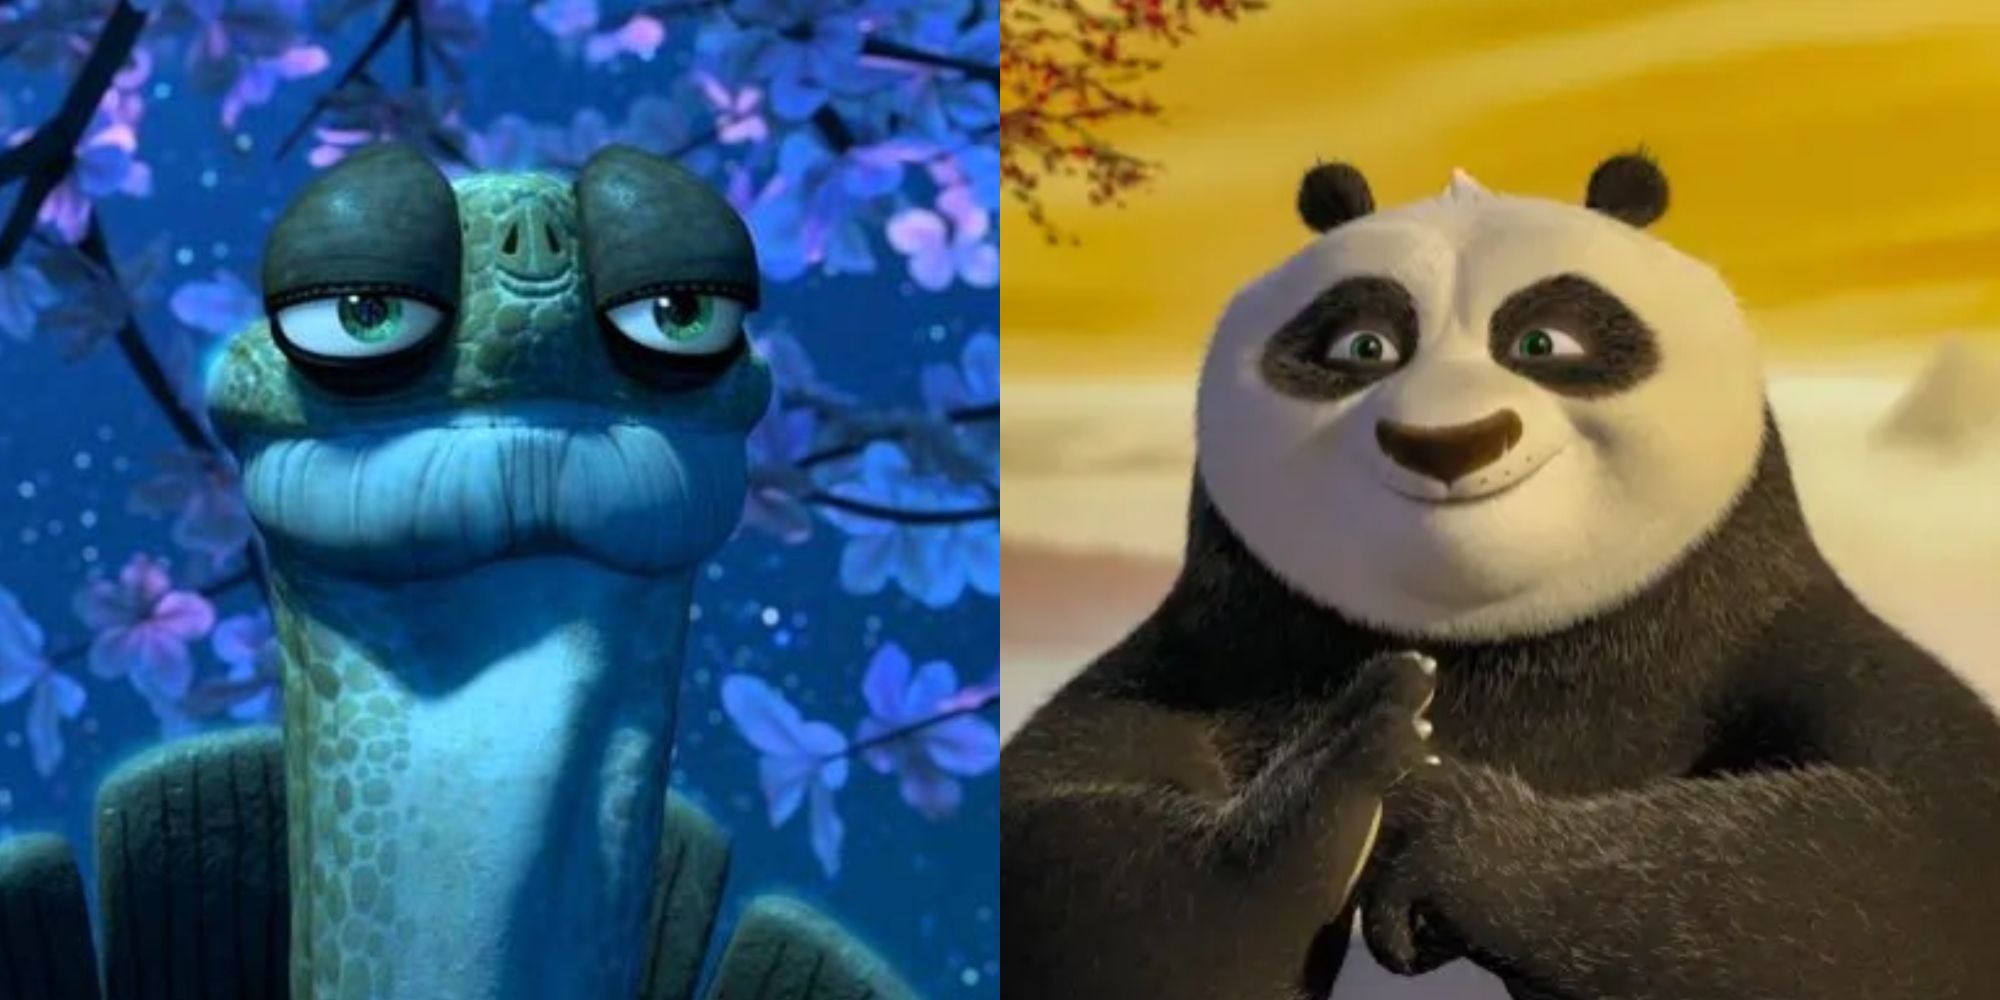 Split images of Master Oogway and Po smiling in Kung Fu Panda